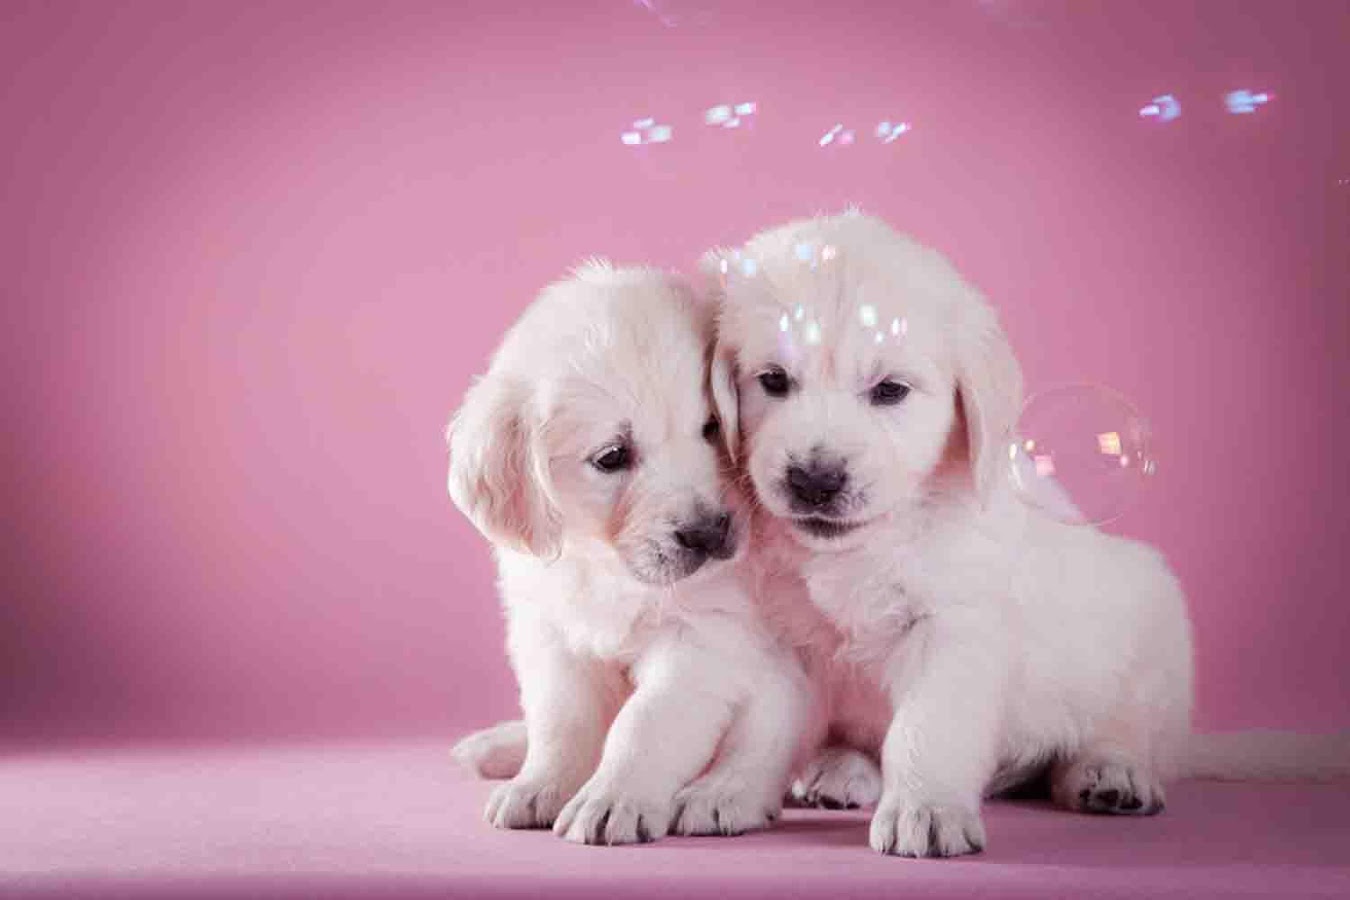 Cute Puppy Backgrounds - Android Apps on Google Play